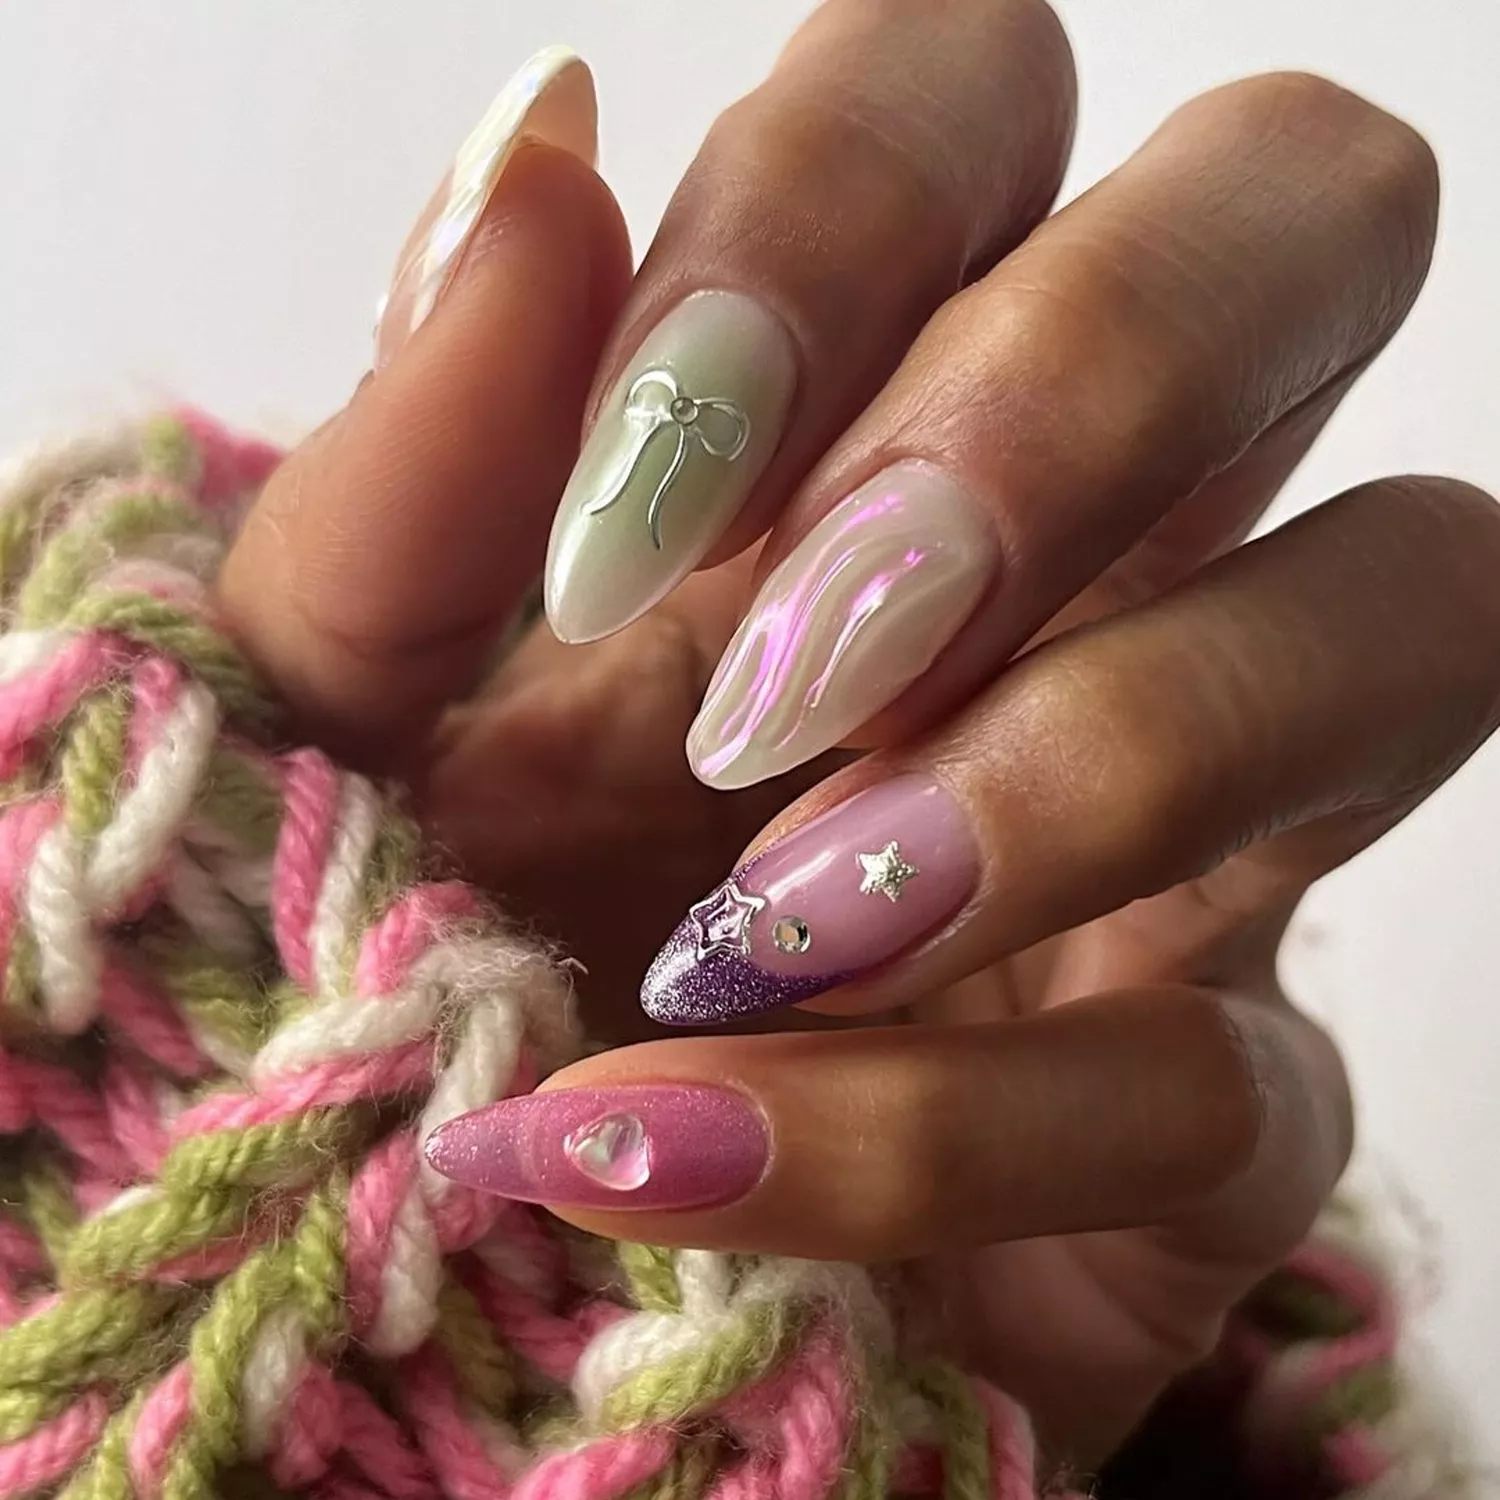 23 April Nail Ideas That'll Take You From Showers to Flowers